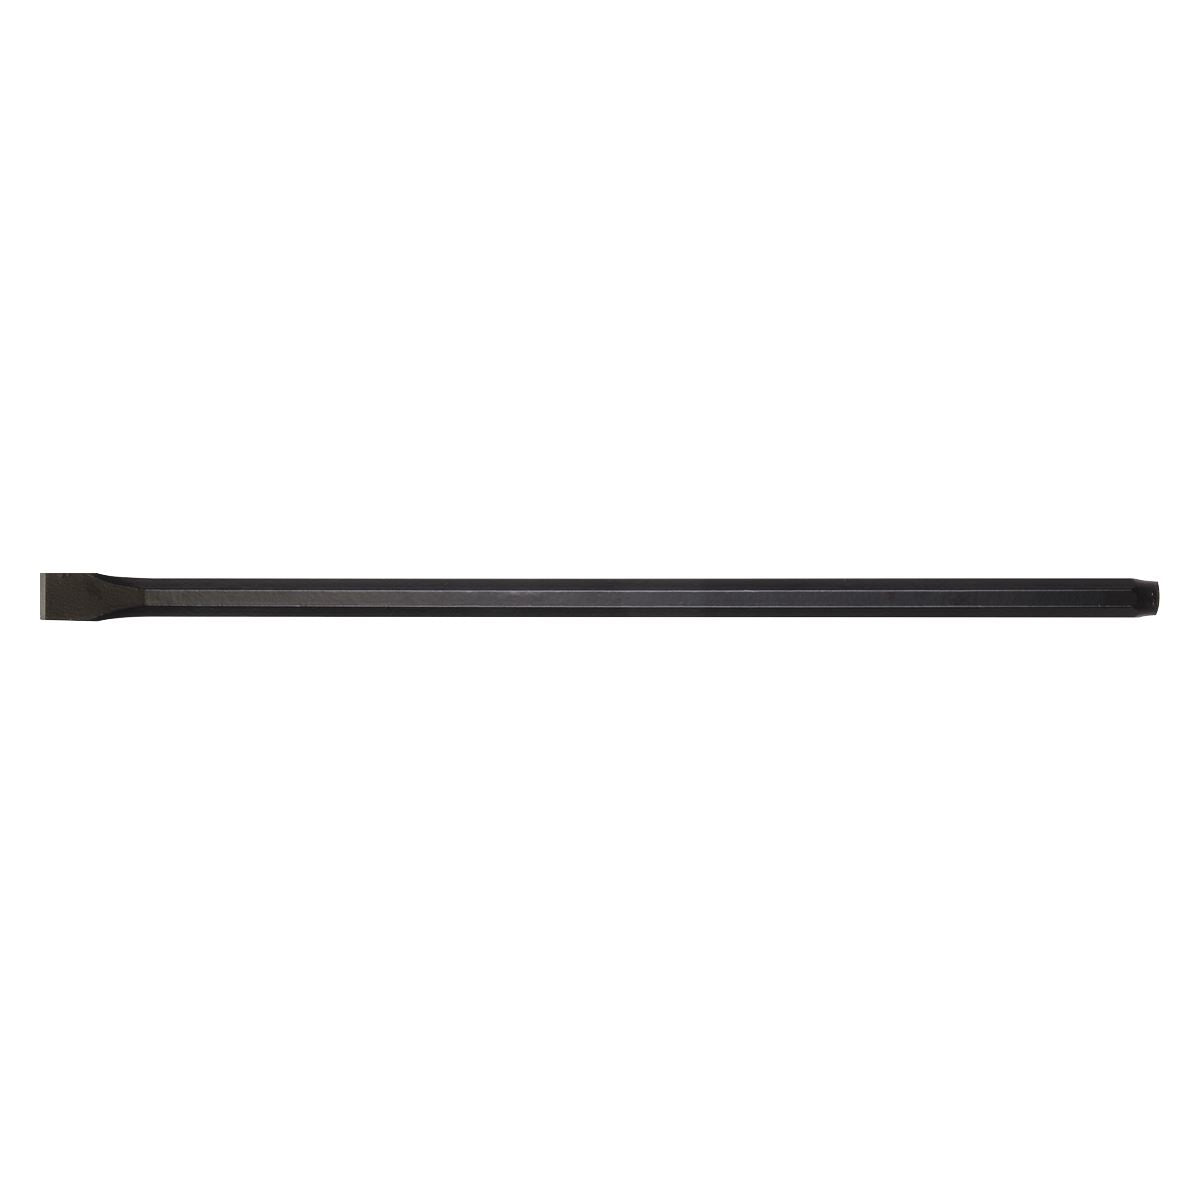 Sealey Cold Chisel 19 x 450mm